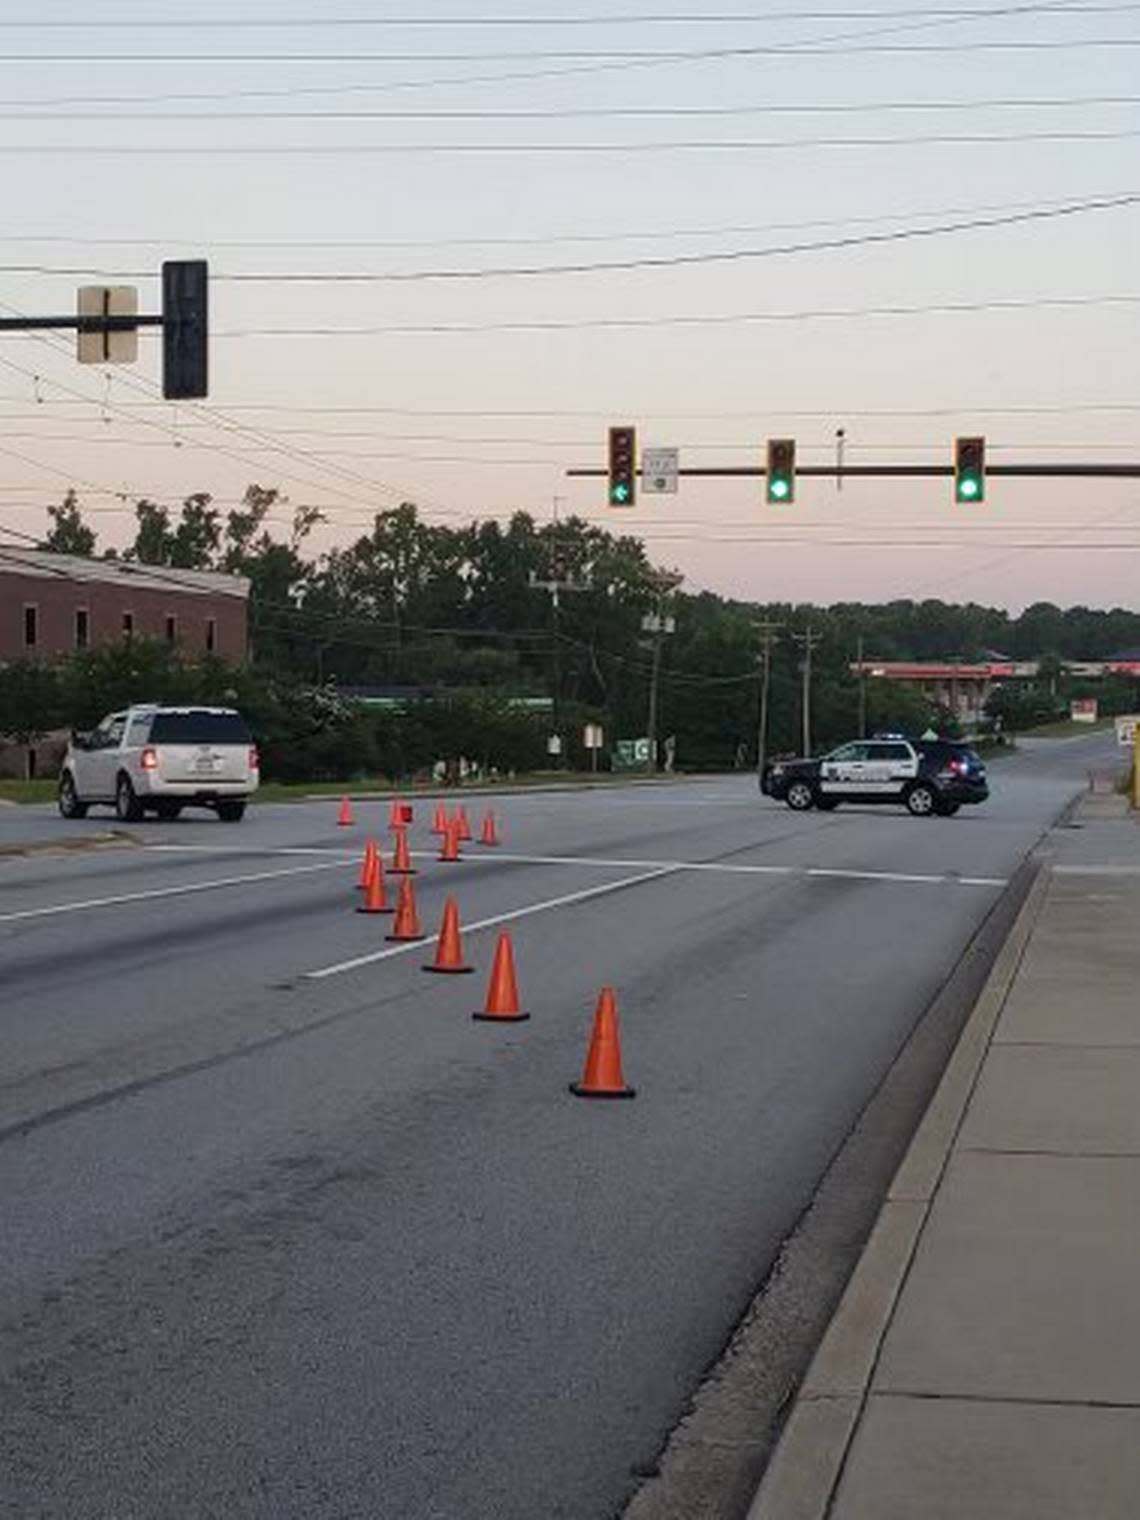 A busy intersection was blocked following a crash, police said.